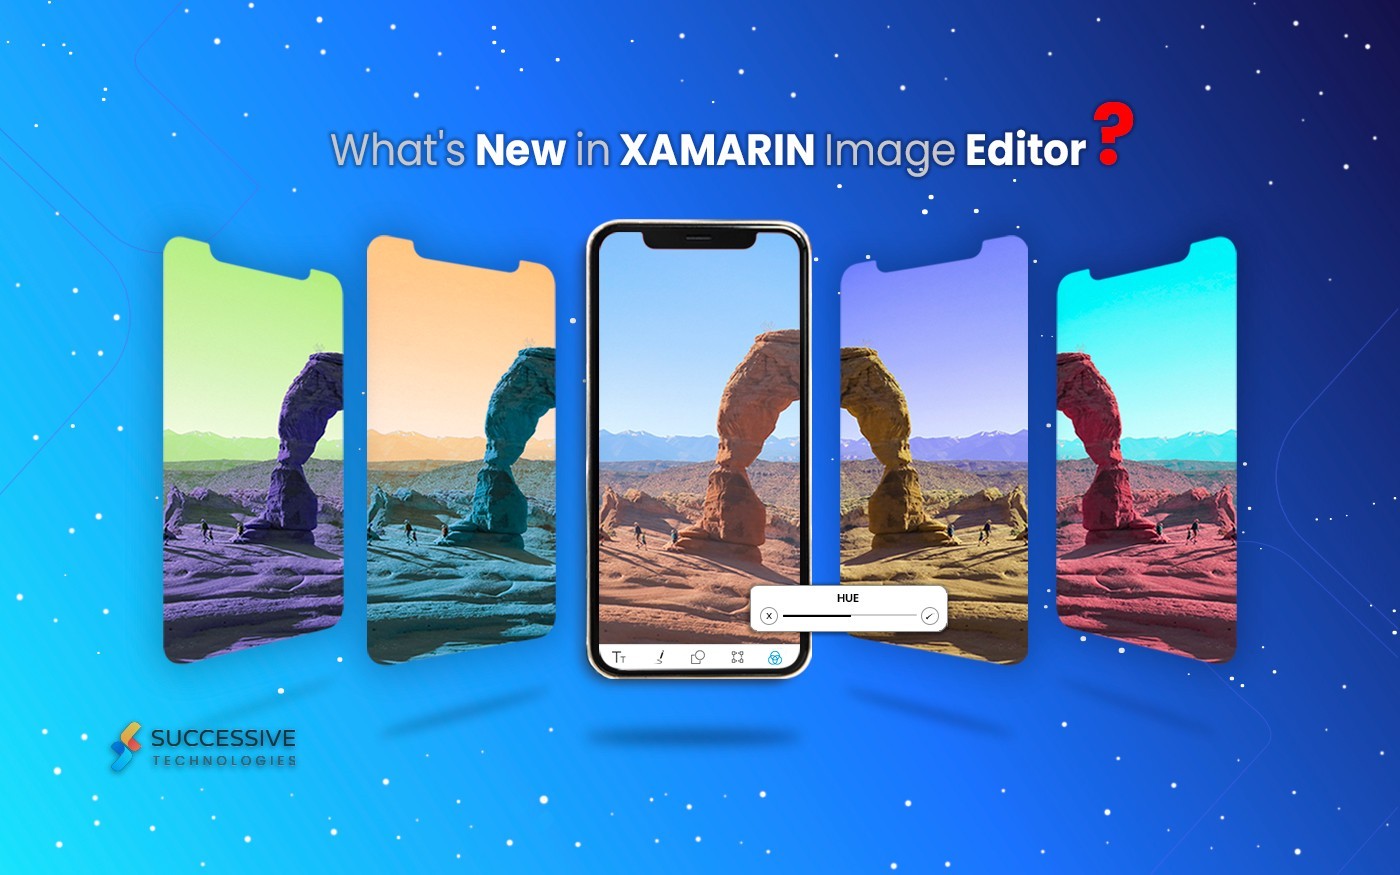 What’s New in Xamarin Image Editor?